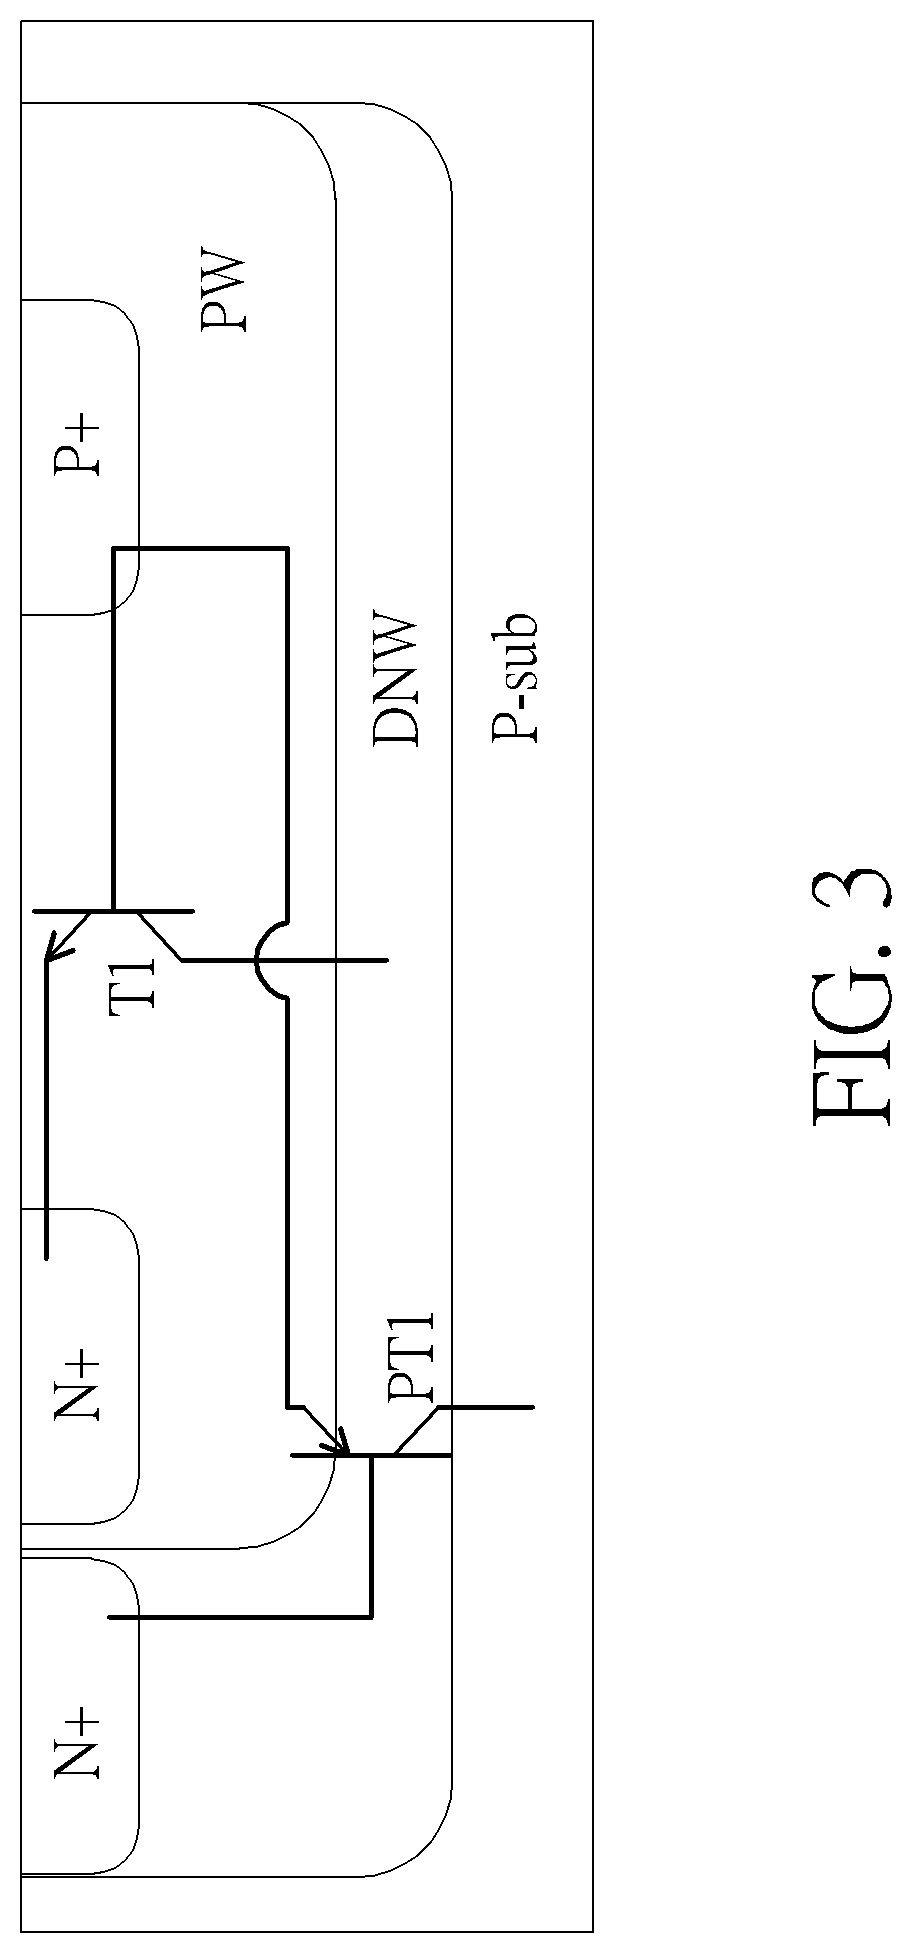 Bandgap voltage reference circuit capable of correcting voltage distortion